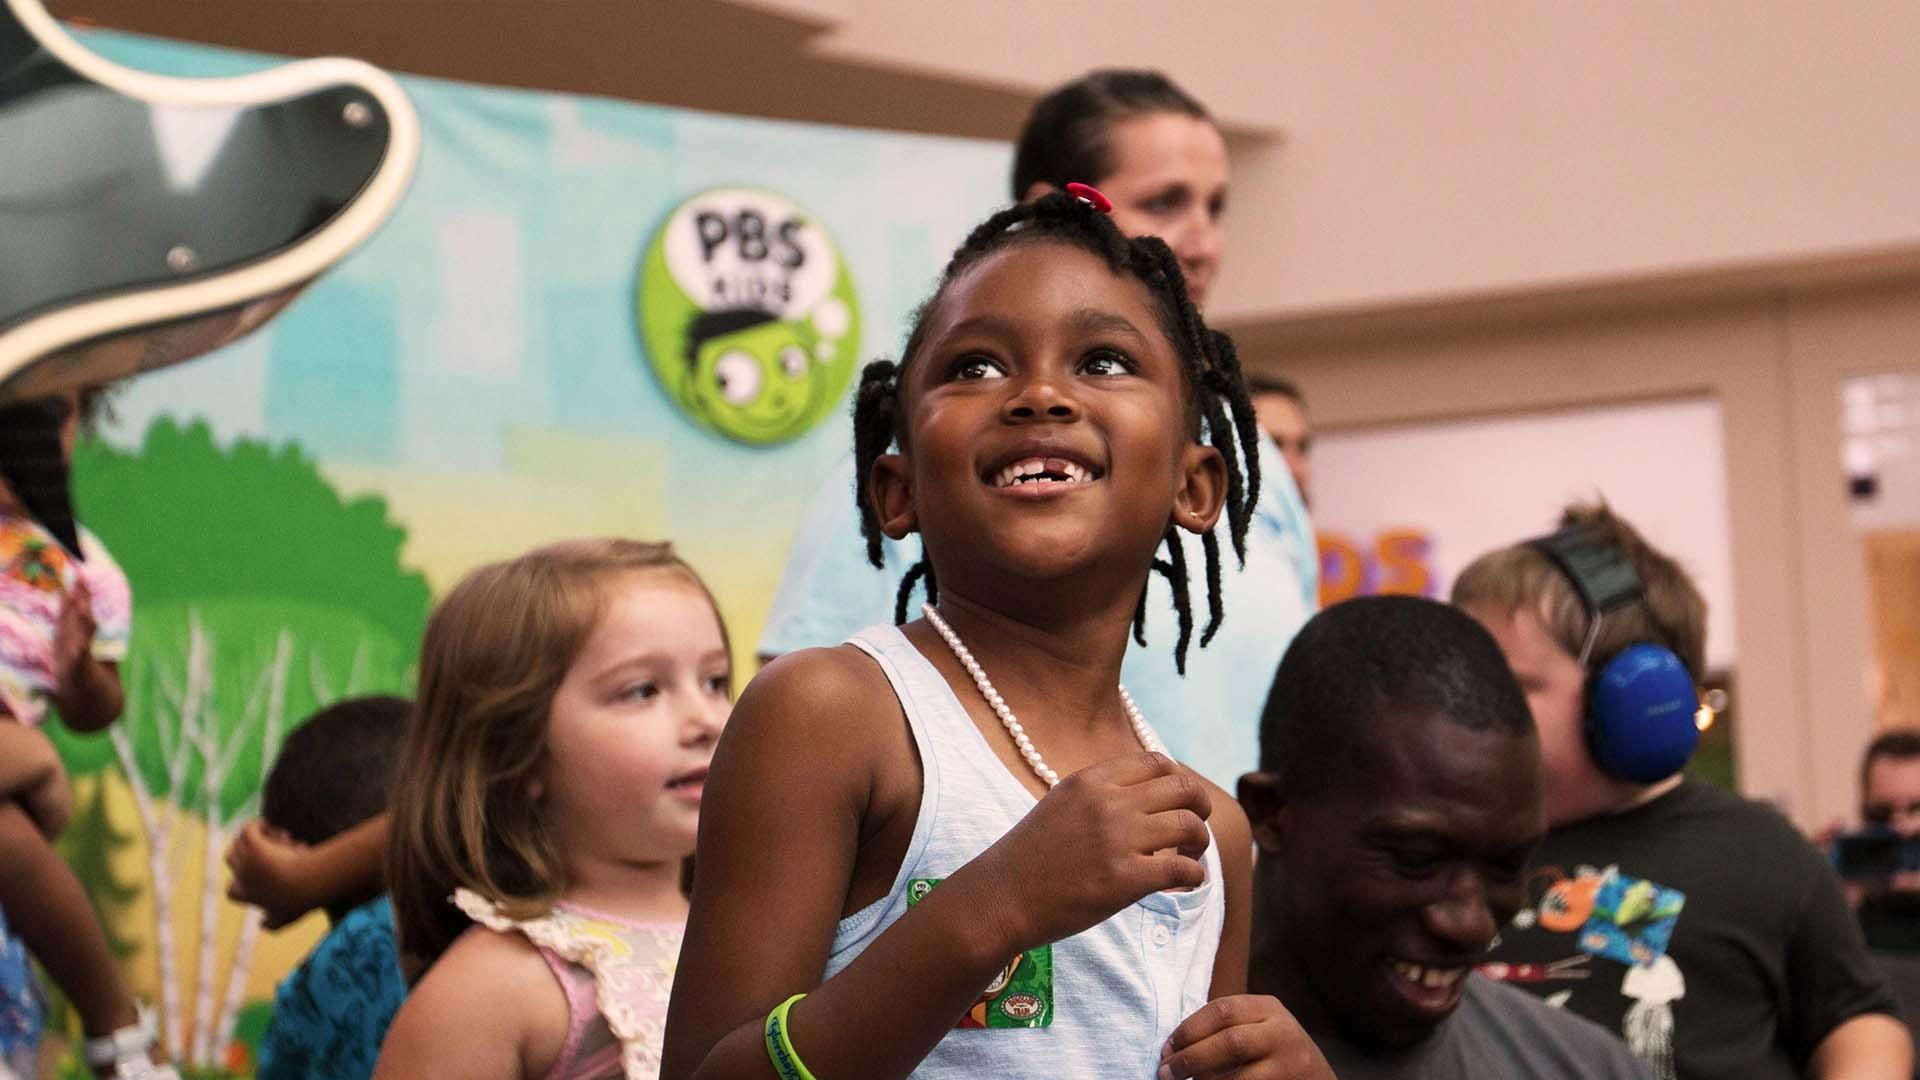 young-black-girl-pbs-kids-event